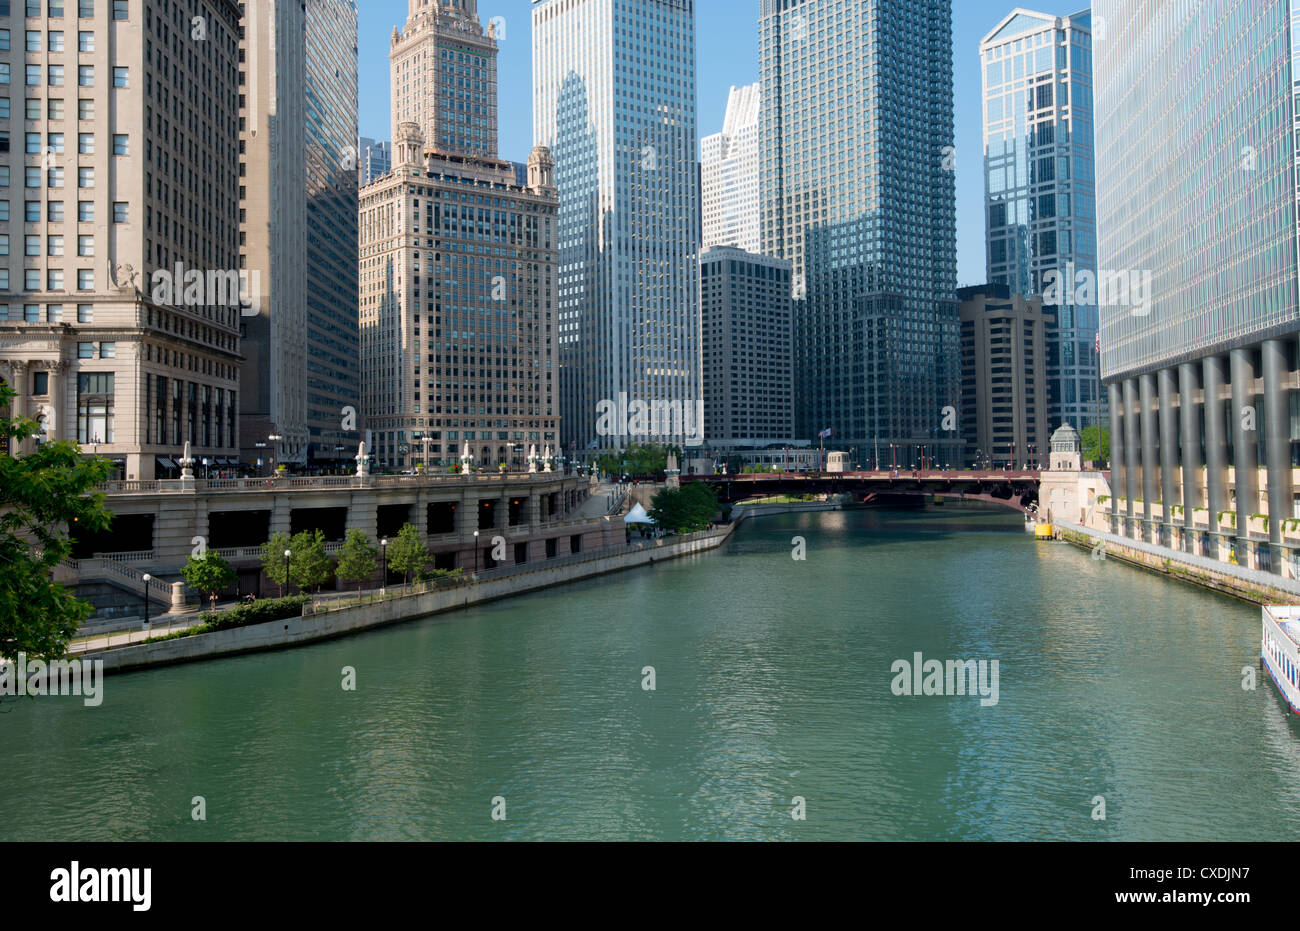 The famous Chicago River in the city of Chicago Illinois Stock Photo